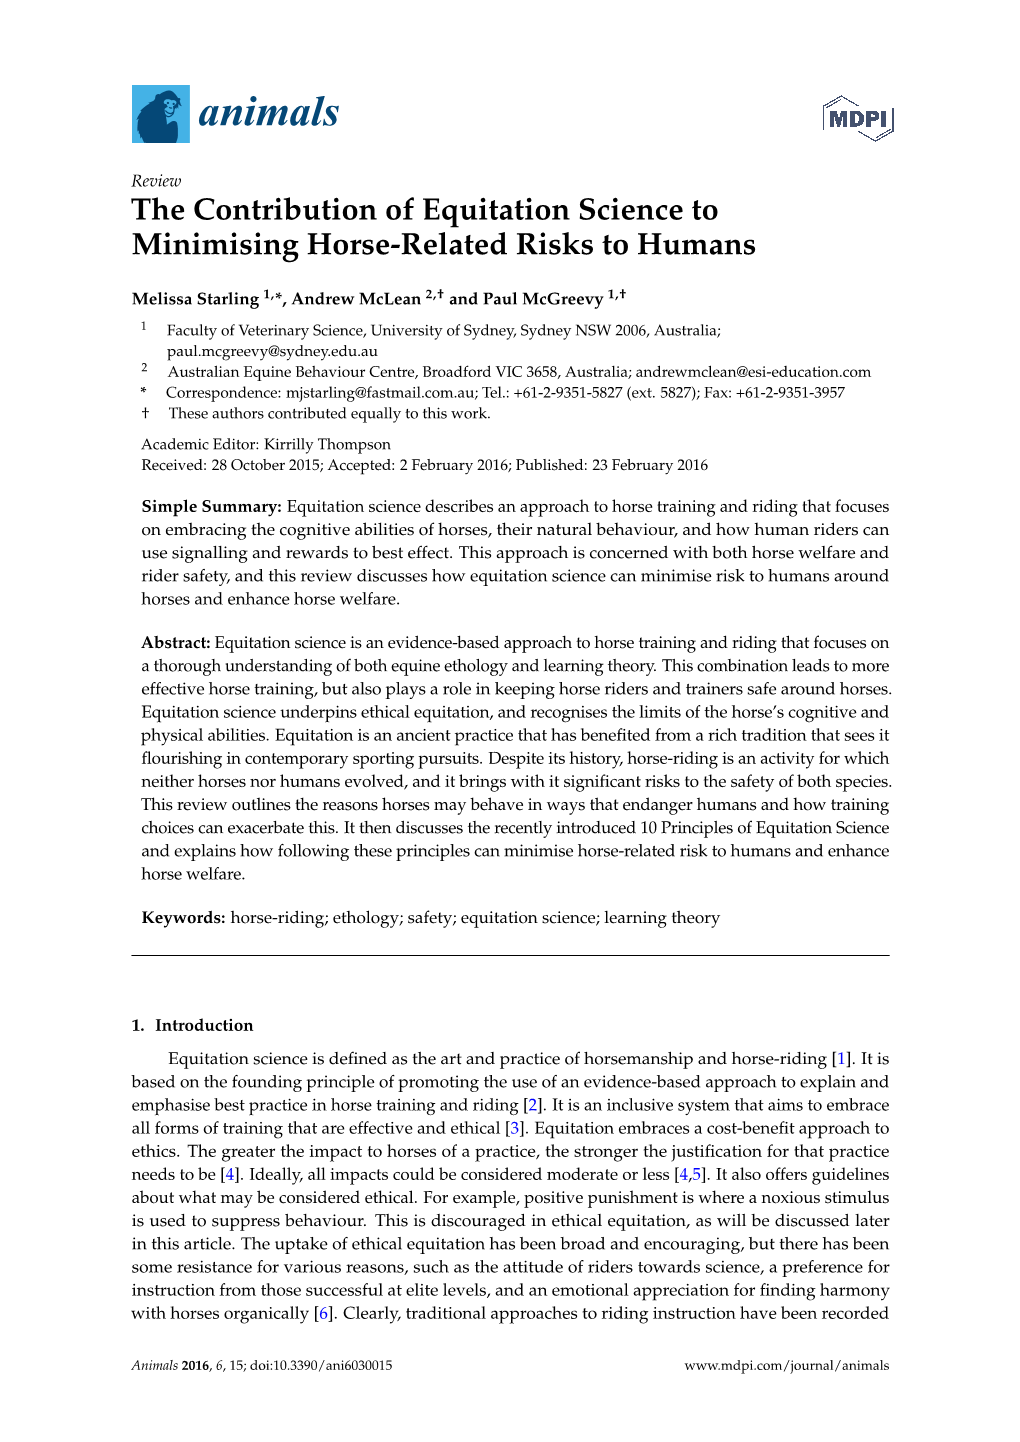 The Contribution of Equitation Science to Minimising Horse-Related Risks to Humans